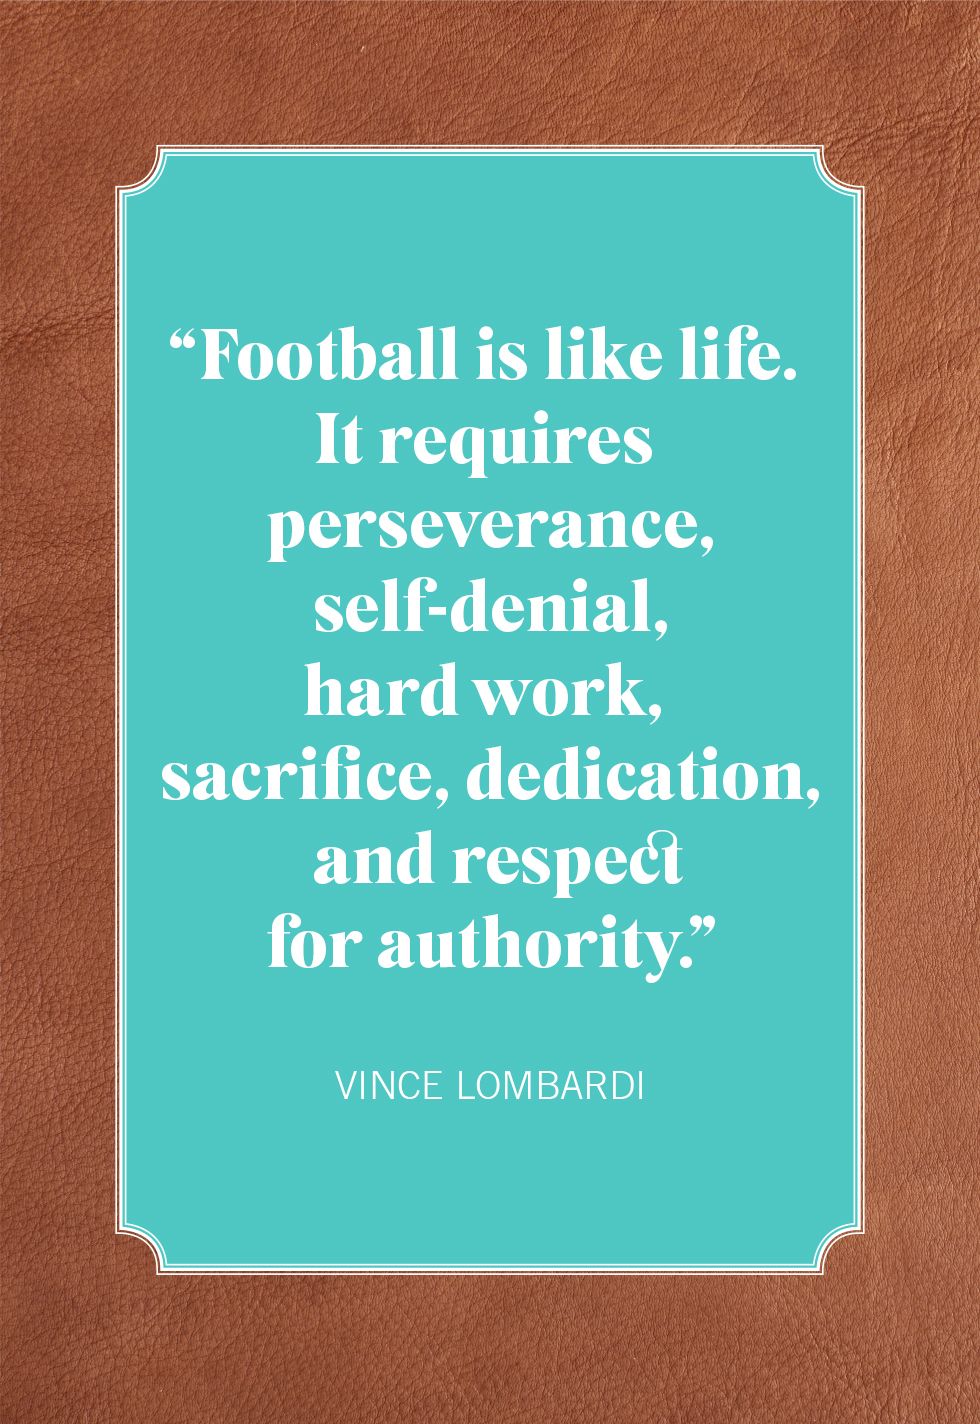 30 Best Football Quotes - Motivational Sports Quotes